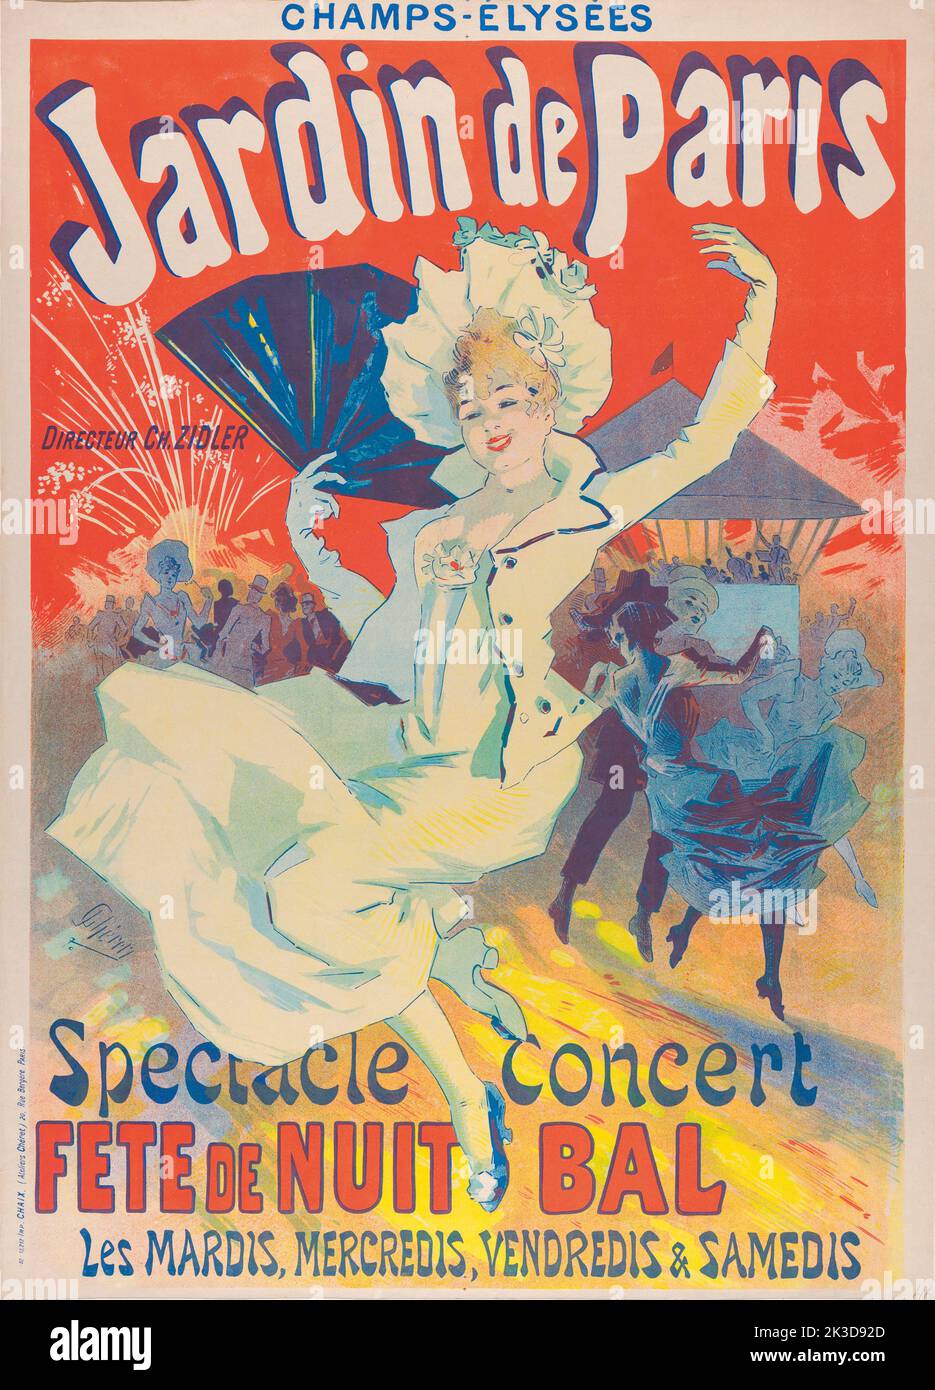 A poster from 1890 for concerts at the Jardin de Paris on the Champs-Elysees, Paris, France.  After a work by Jules Cheret. Stock Photo